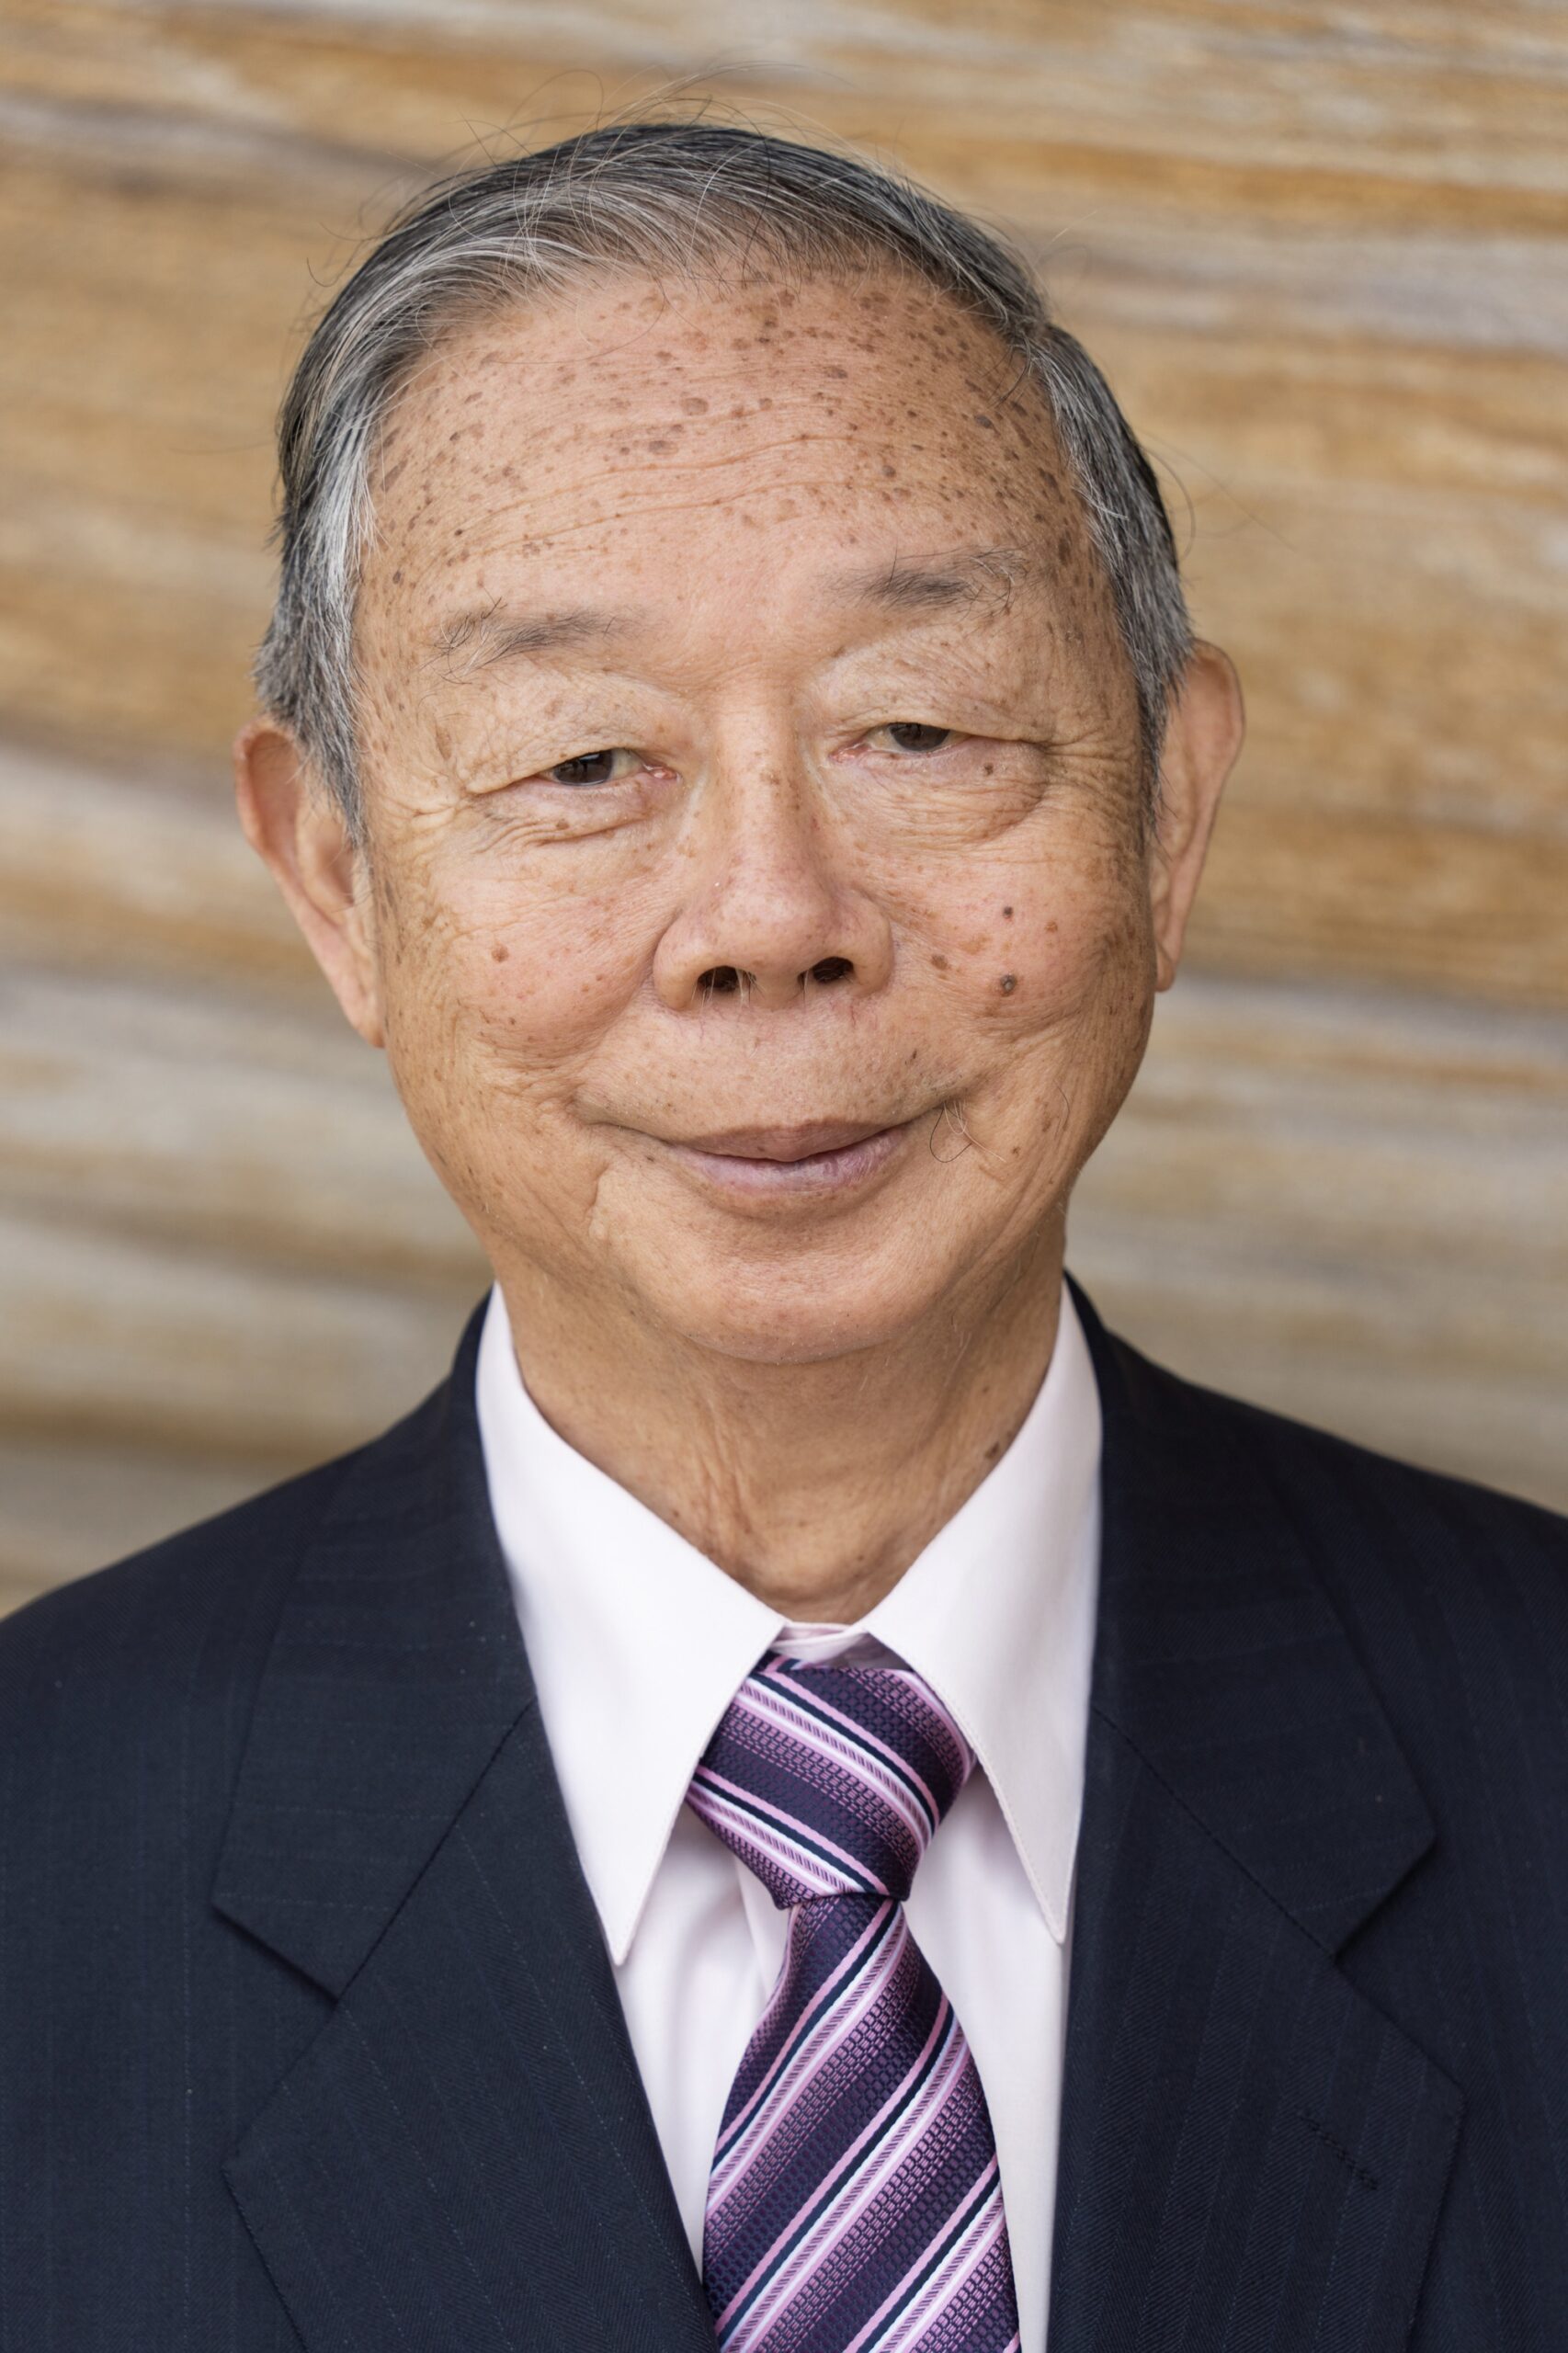 An old Asian man with short hair wearing a suit and tie and looking into the camera as his corporate headshots are taken